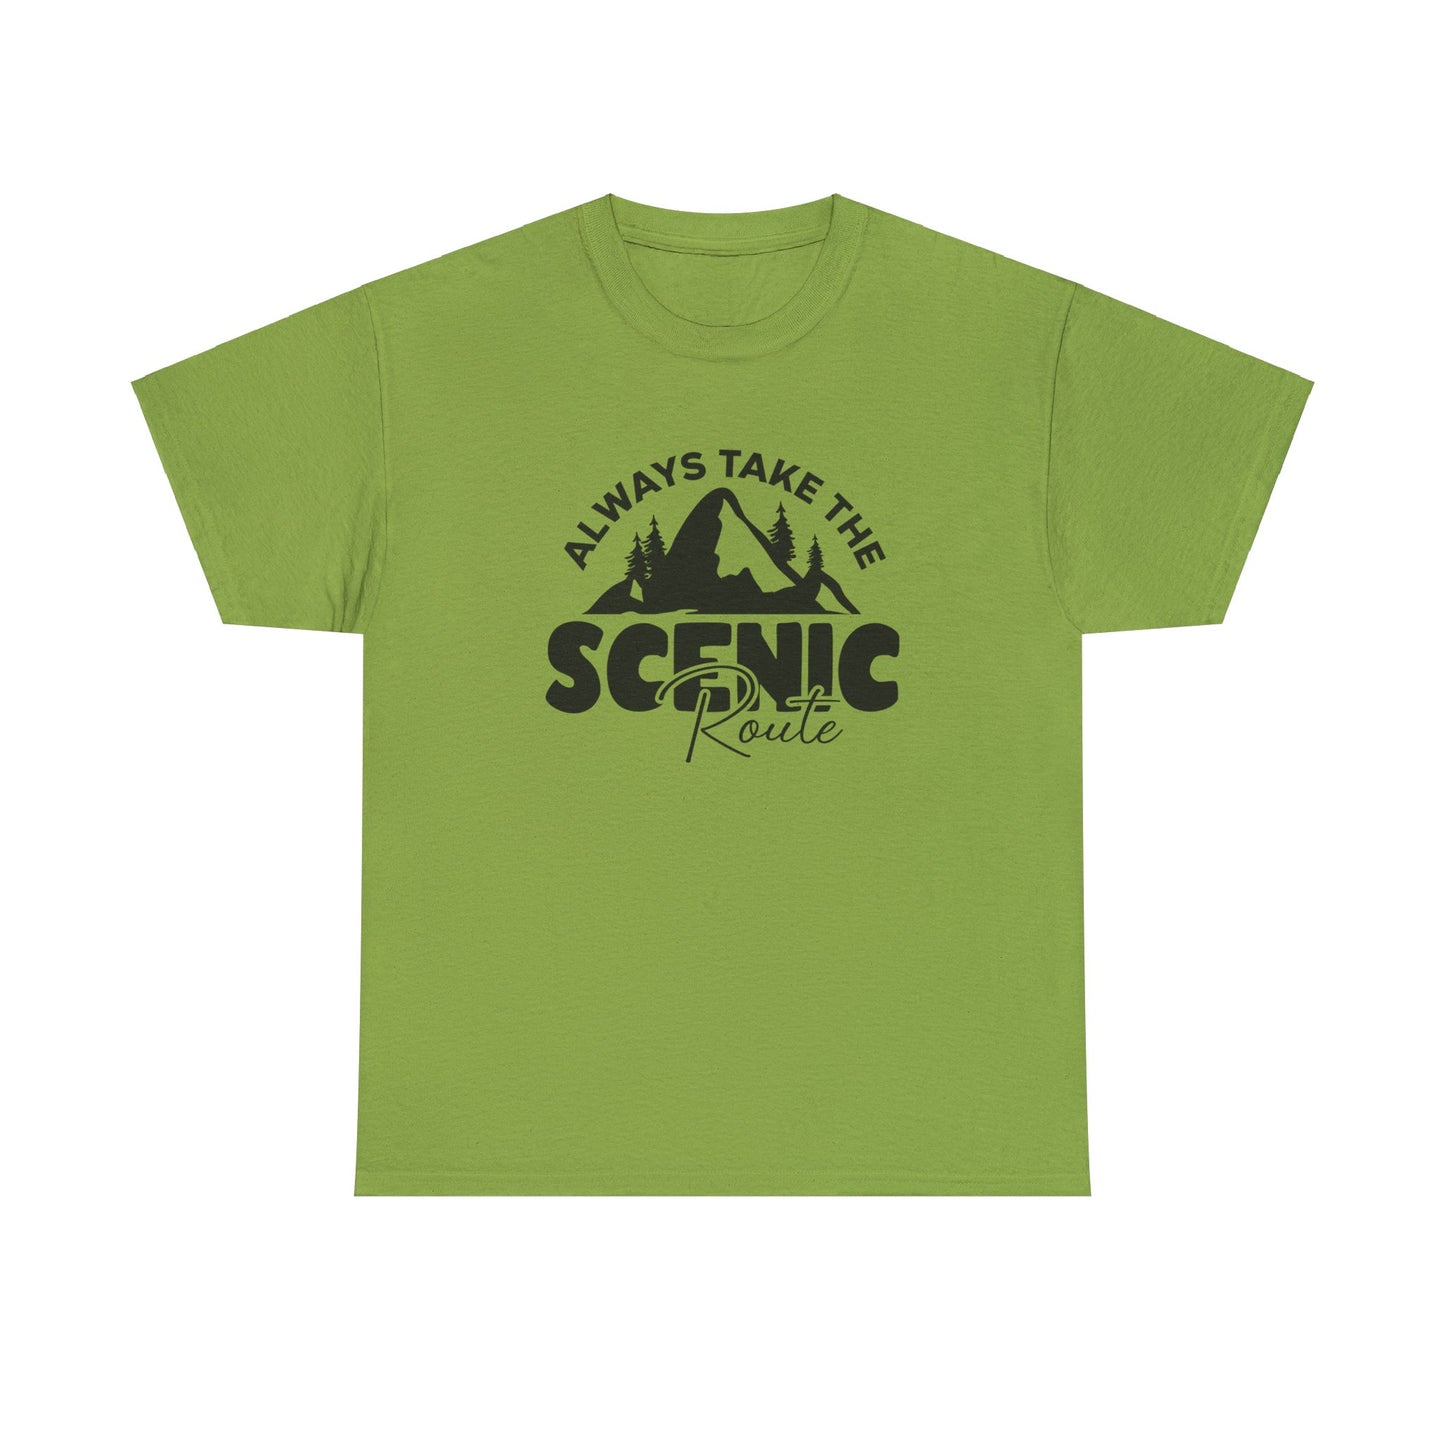 Scenic Route T-Shirt For Adventure TShirt For Great Outdoors T Shirt For Mountains Tee